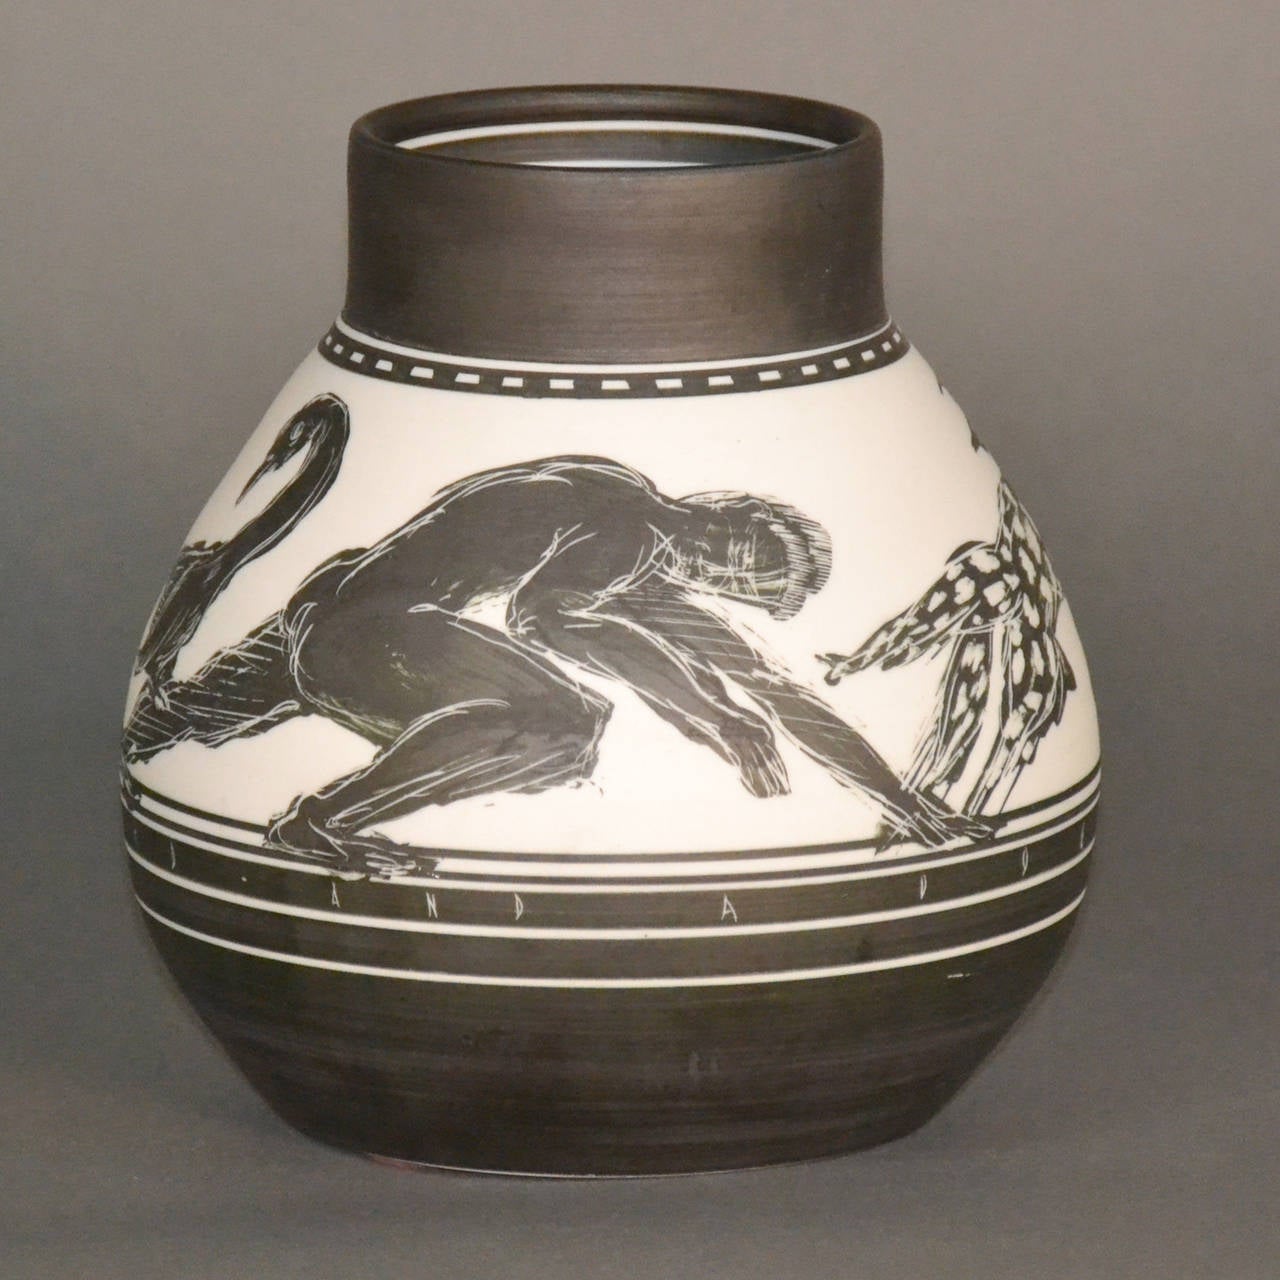 Black and white porcelain vase with detailed etched design and inscription Two- Men- A Bird- And A Dog.  The base is signed E. S. Eberle.